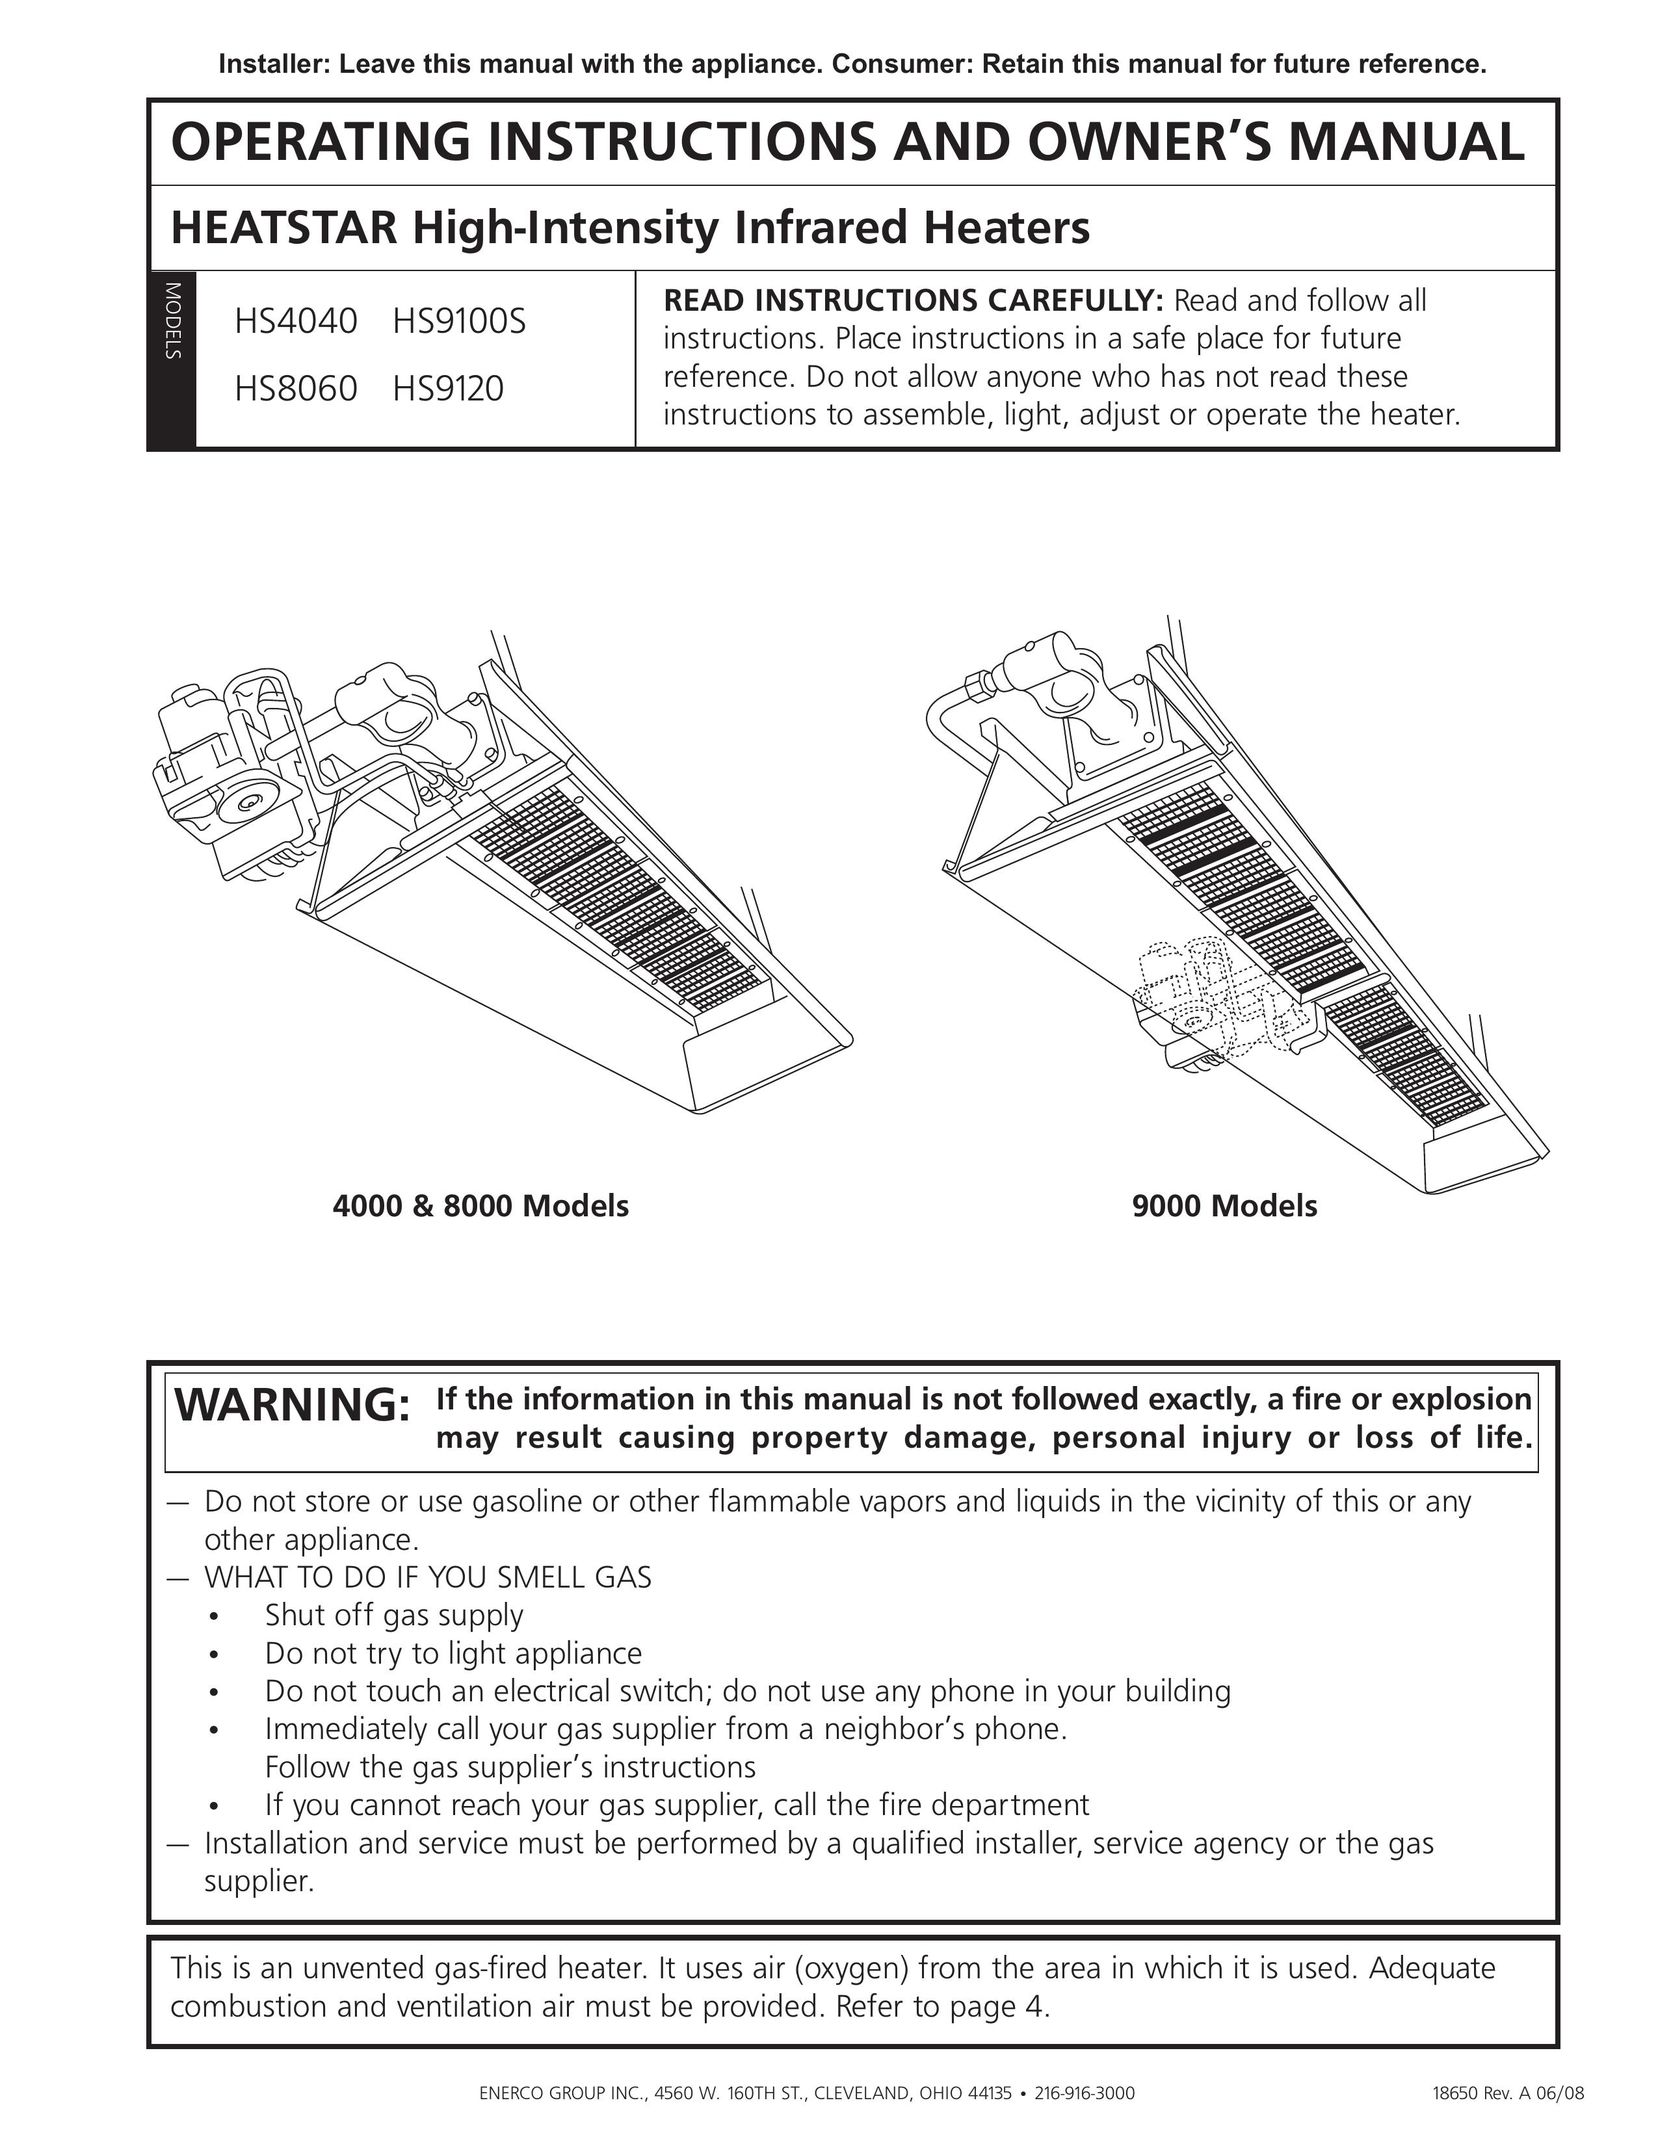 Enerco HS8060 Electric Heater User Manual